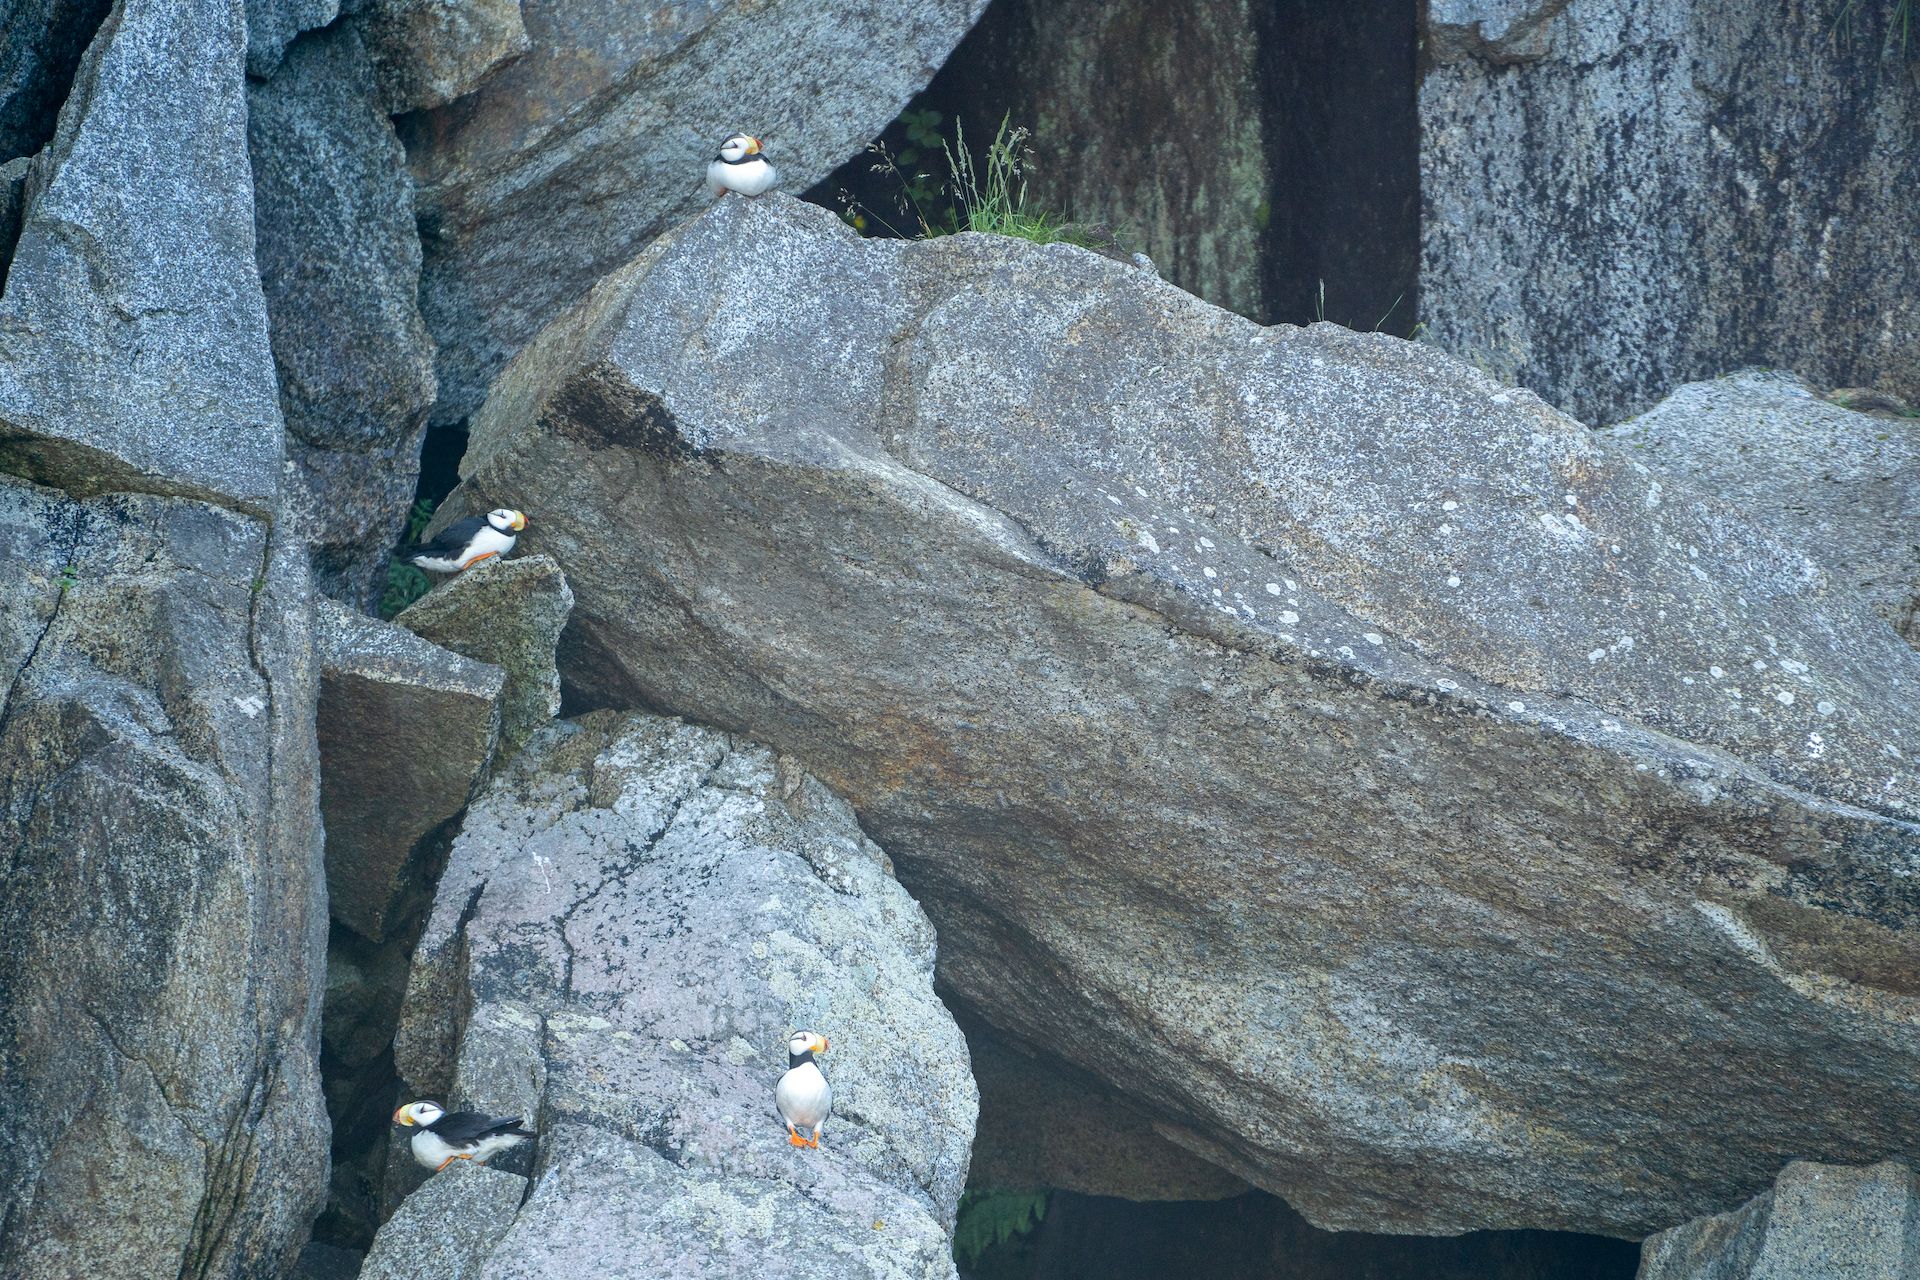 A family of horned puffins on the rocky face of the island